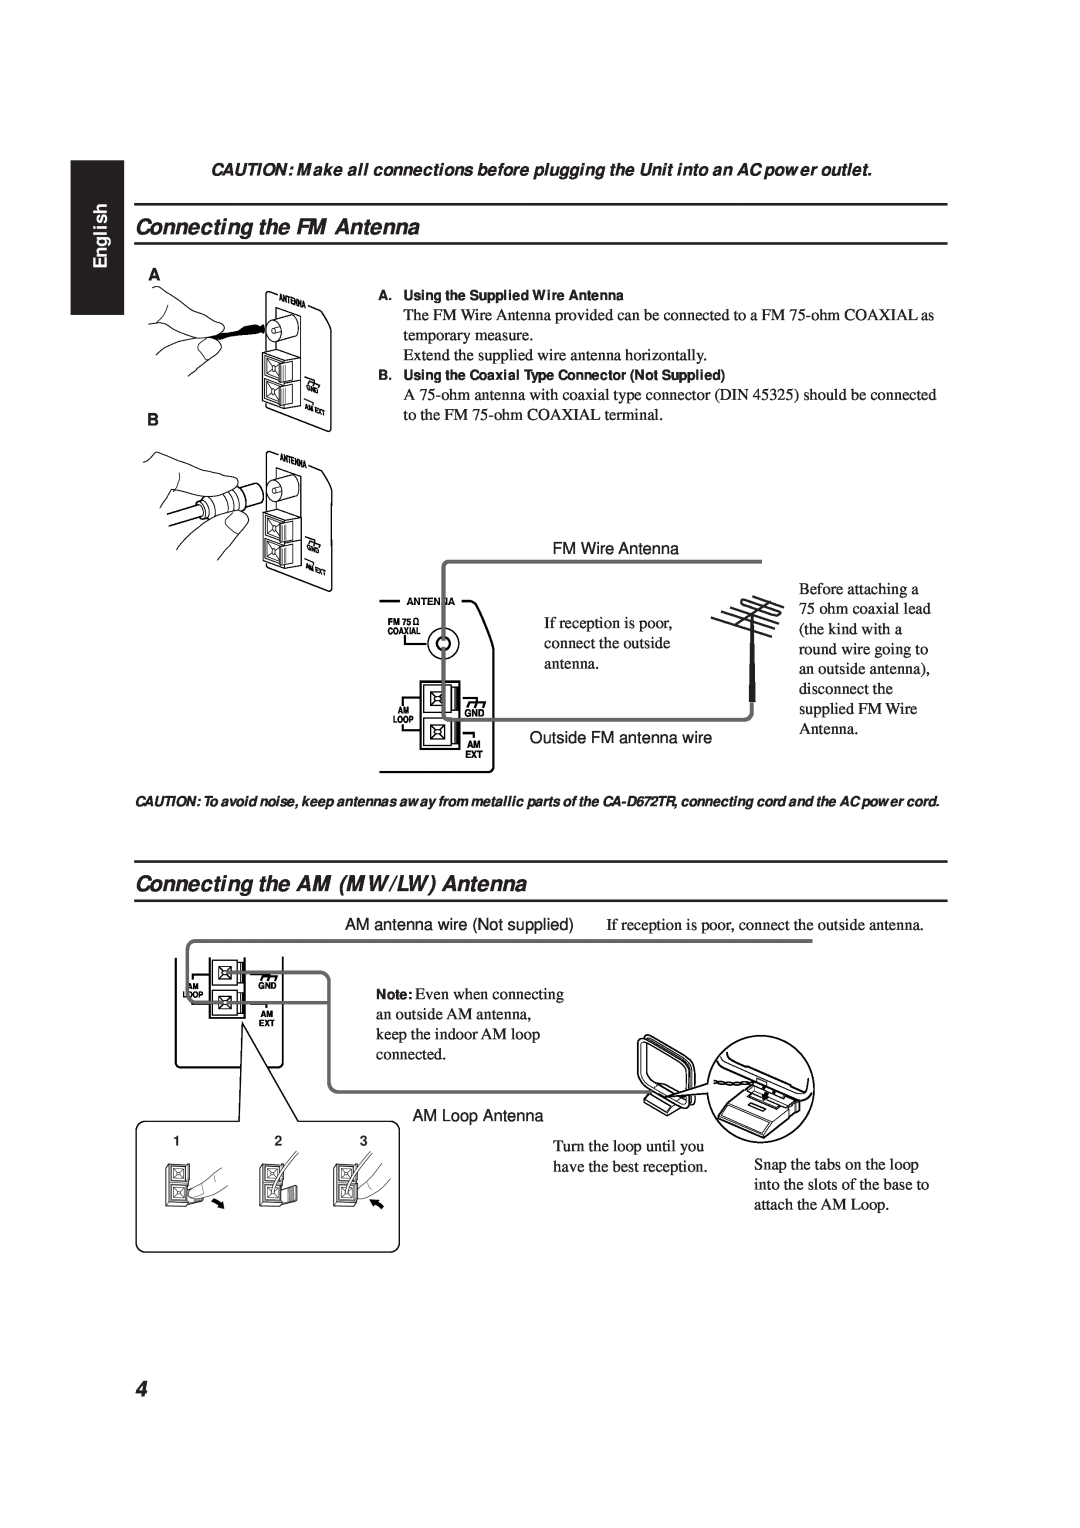 JVC CA-D672TR manual Connecting the FM Antenna, Connecting the AM MW/LW Antenna, English, A.Using the Supplied Wire Antenna 